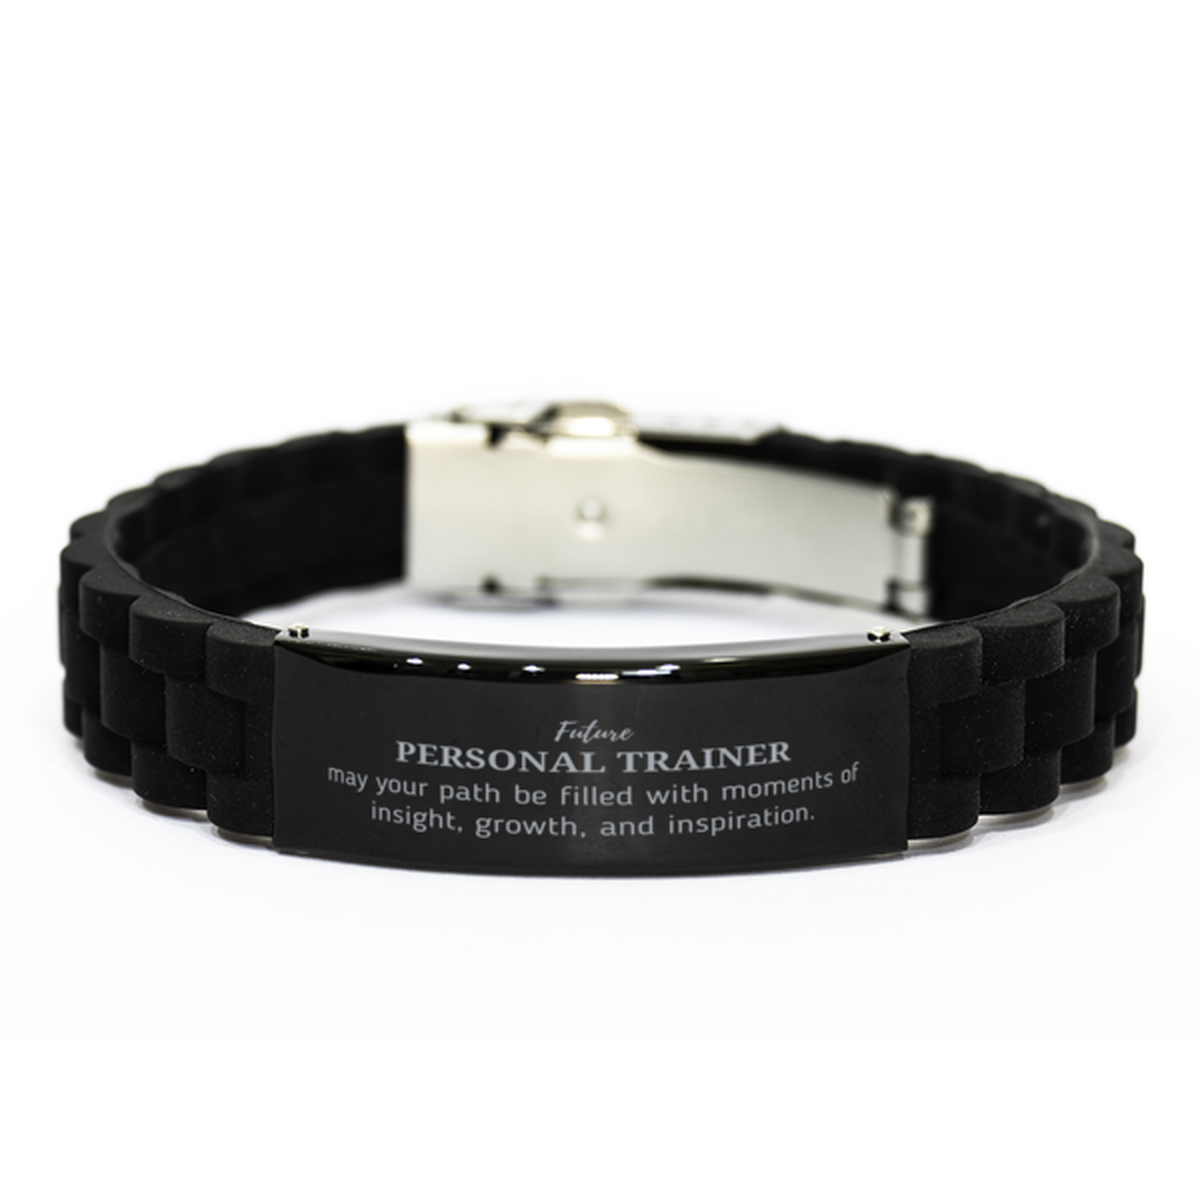 Future Personal Trainer Gifts, May your path be filled with moments of insight, Graduation Gifts for New Personal Trainer, Christmas Unique Black Glidelock Clasp Bracelet For Men, Women, Friends